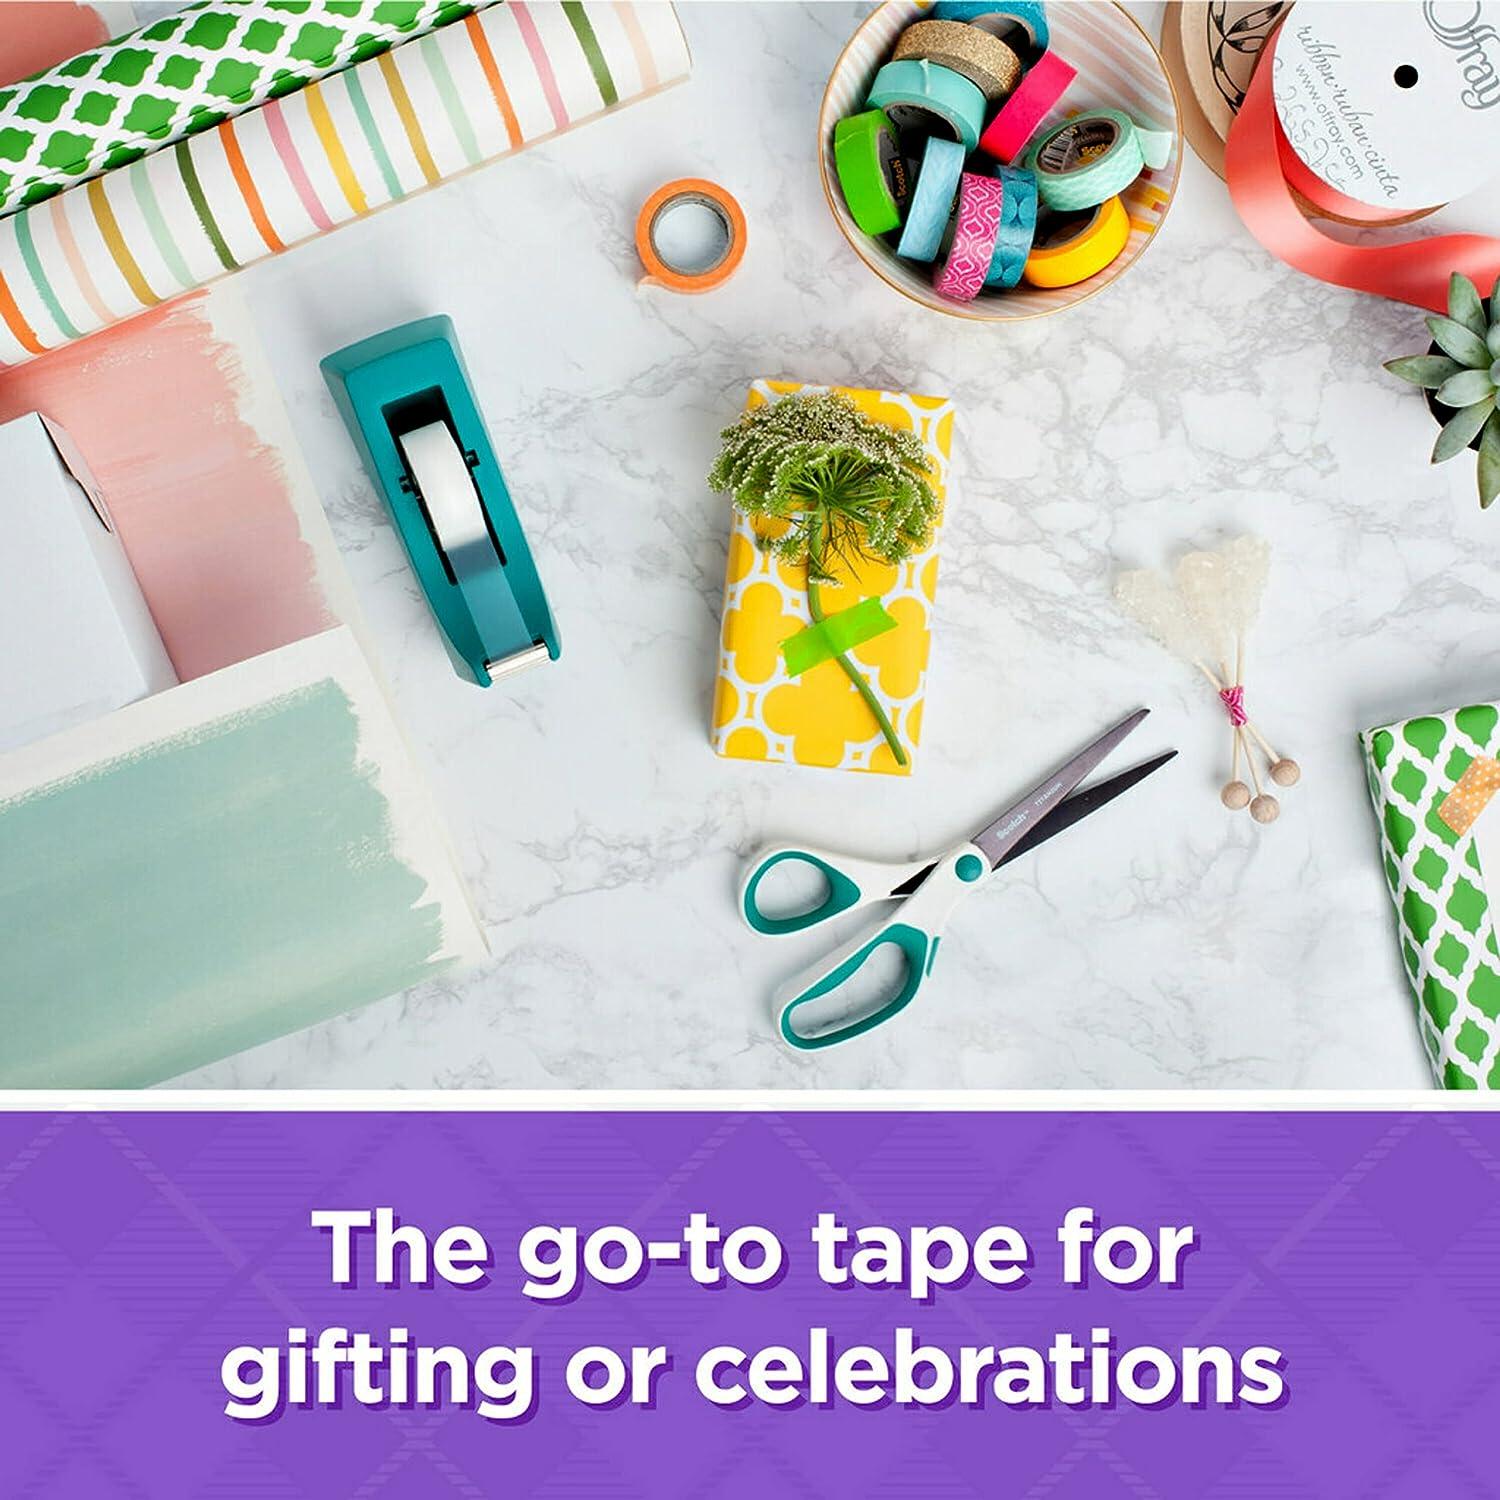  Scotch Gift Wrap Tape, 6 Rolls, The Go-To Tape for the  Holidays, 3/4 x 650 Inches, Dispensered (615-GW) : Office Products